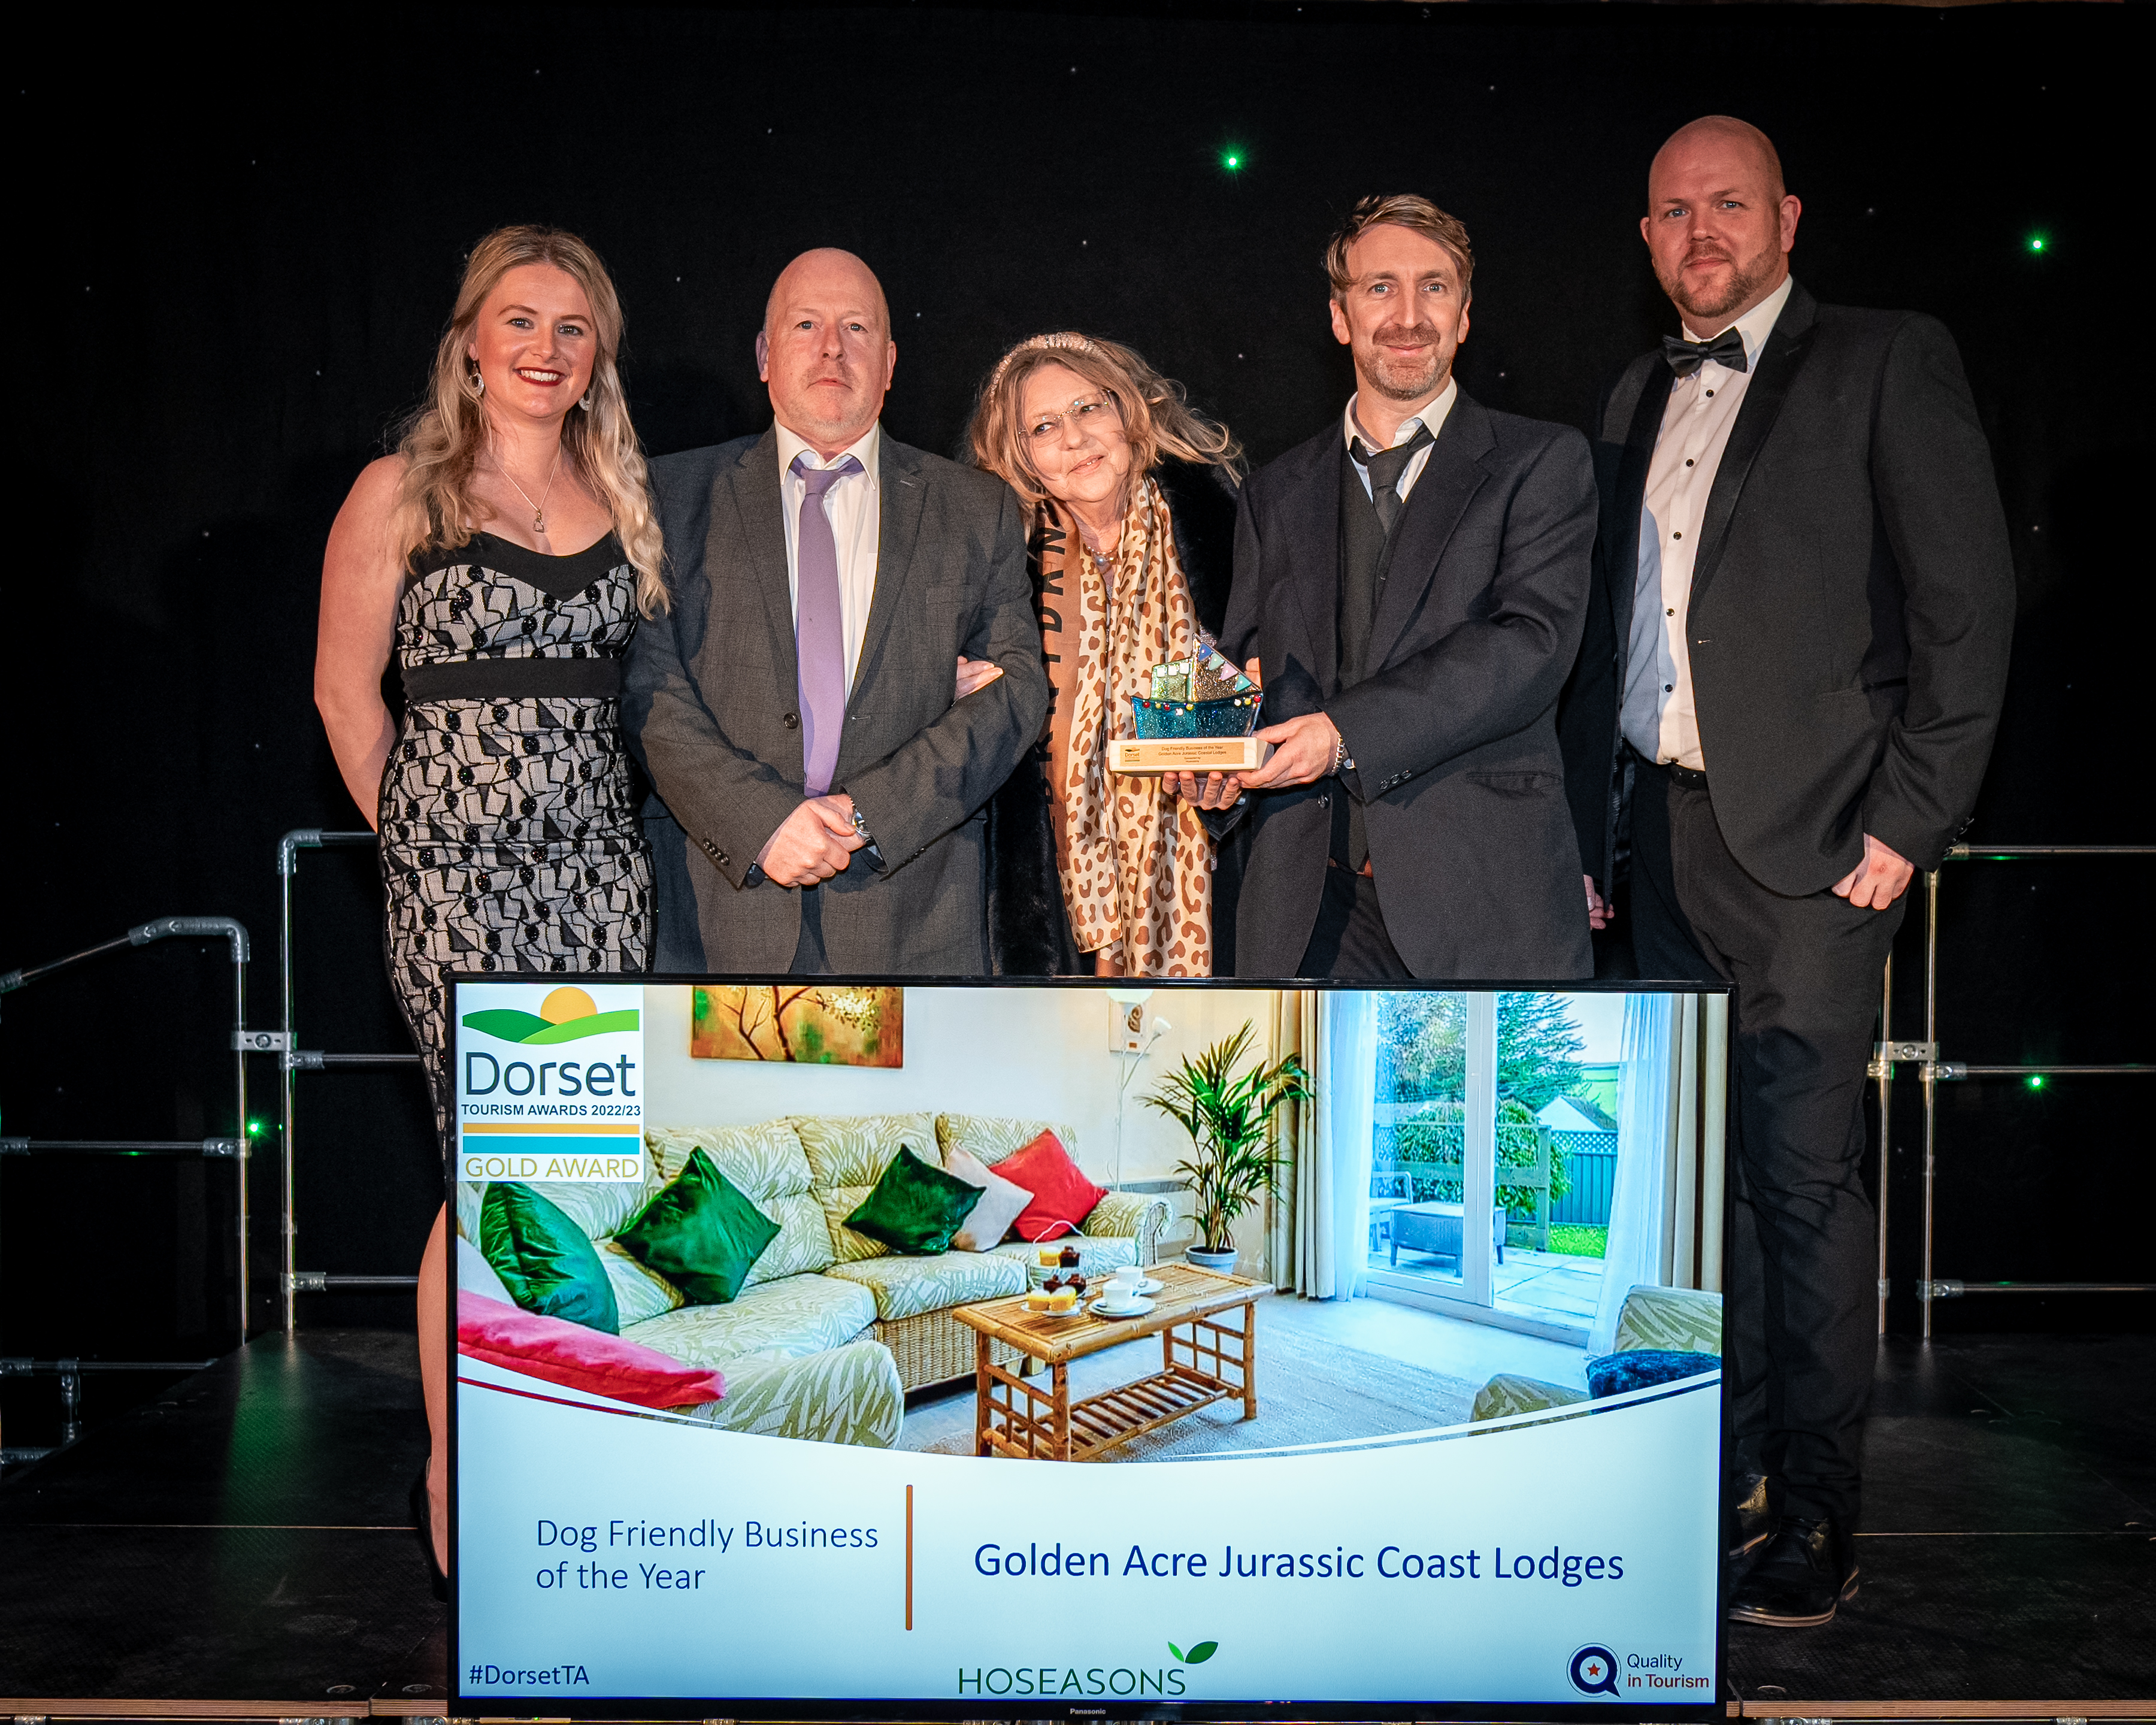 Winners from Golden Acre Jurassic Coast Lodges (photo credit: Nick Williams)